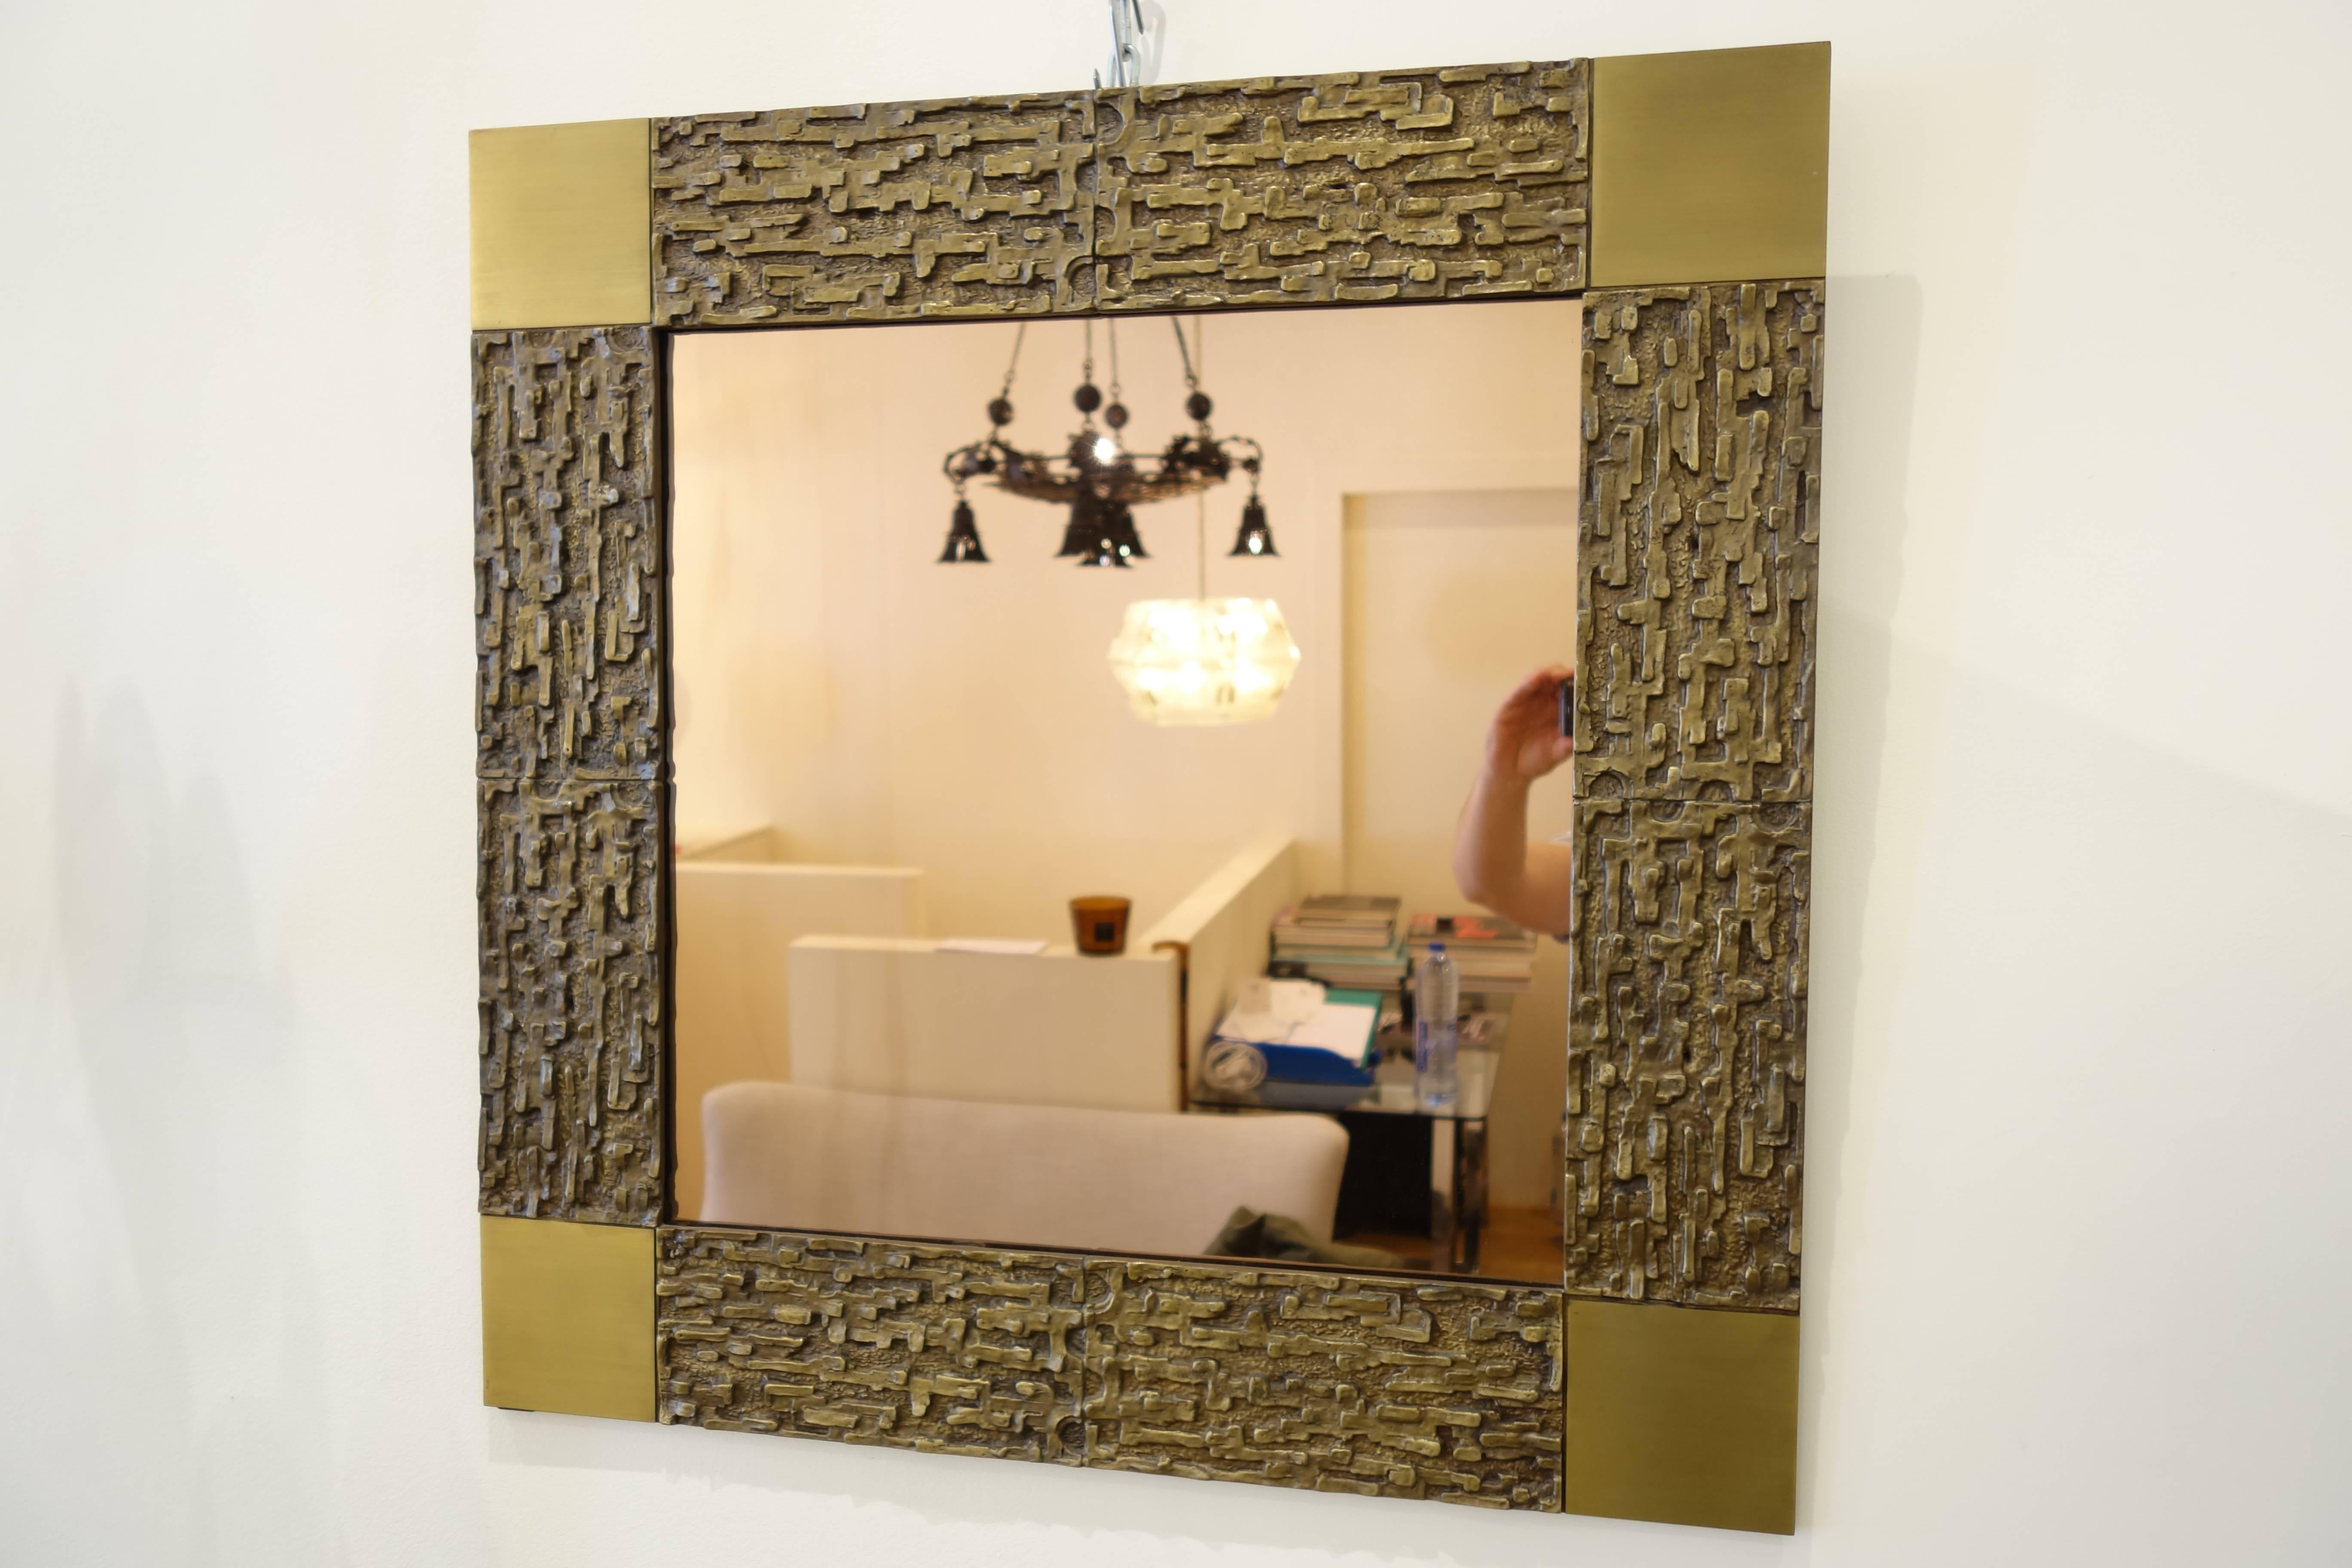 The mirror decorated with abstract pattern squared by polished square.